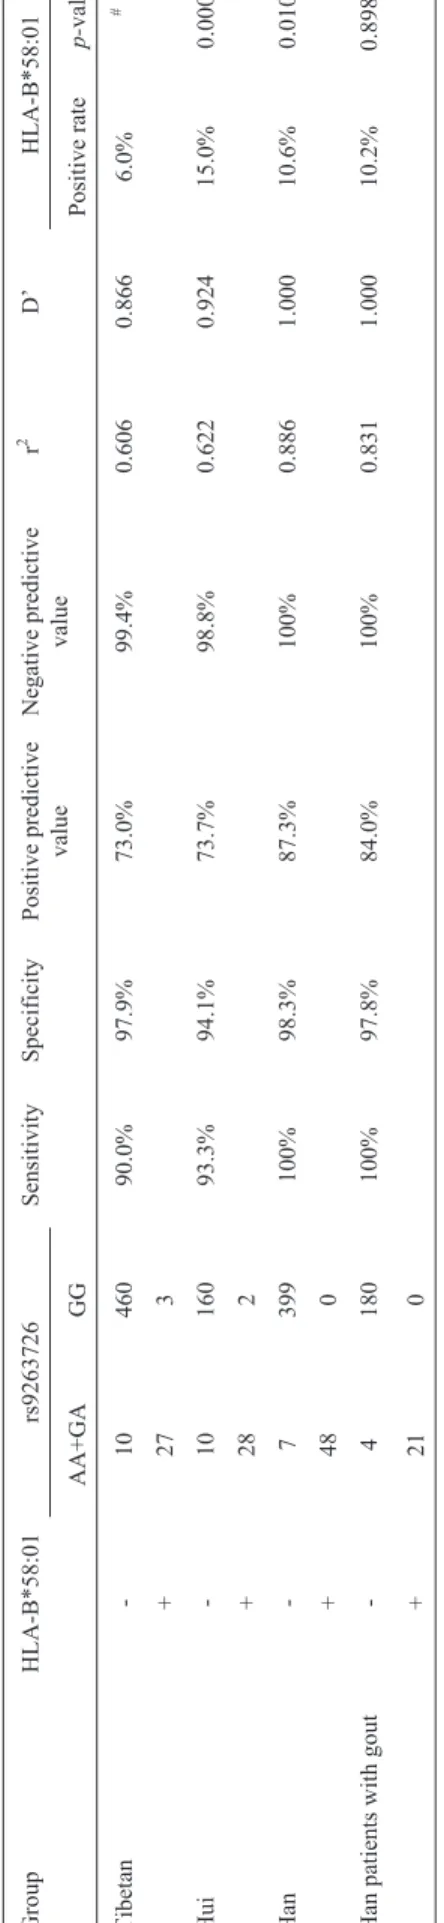 Table 4 - HLA-B genotyping of AA homozygote samples in the three pop- pop-ulations.